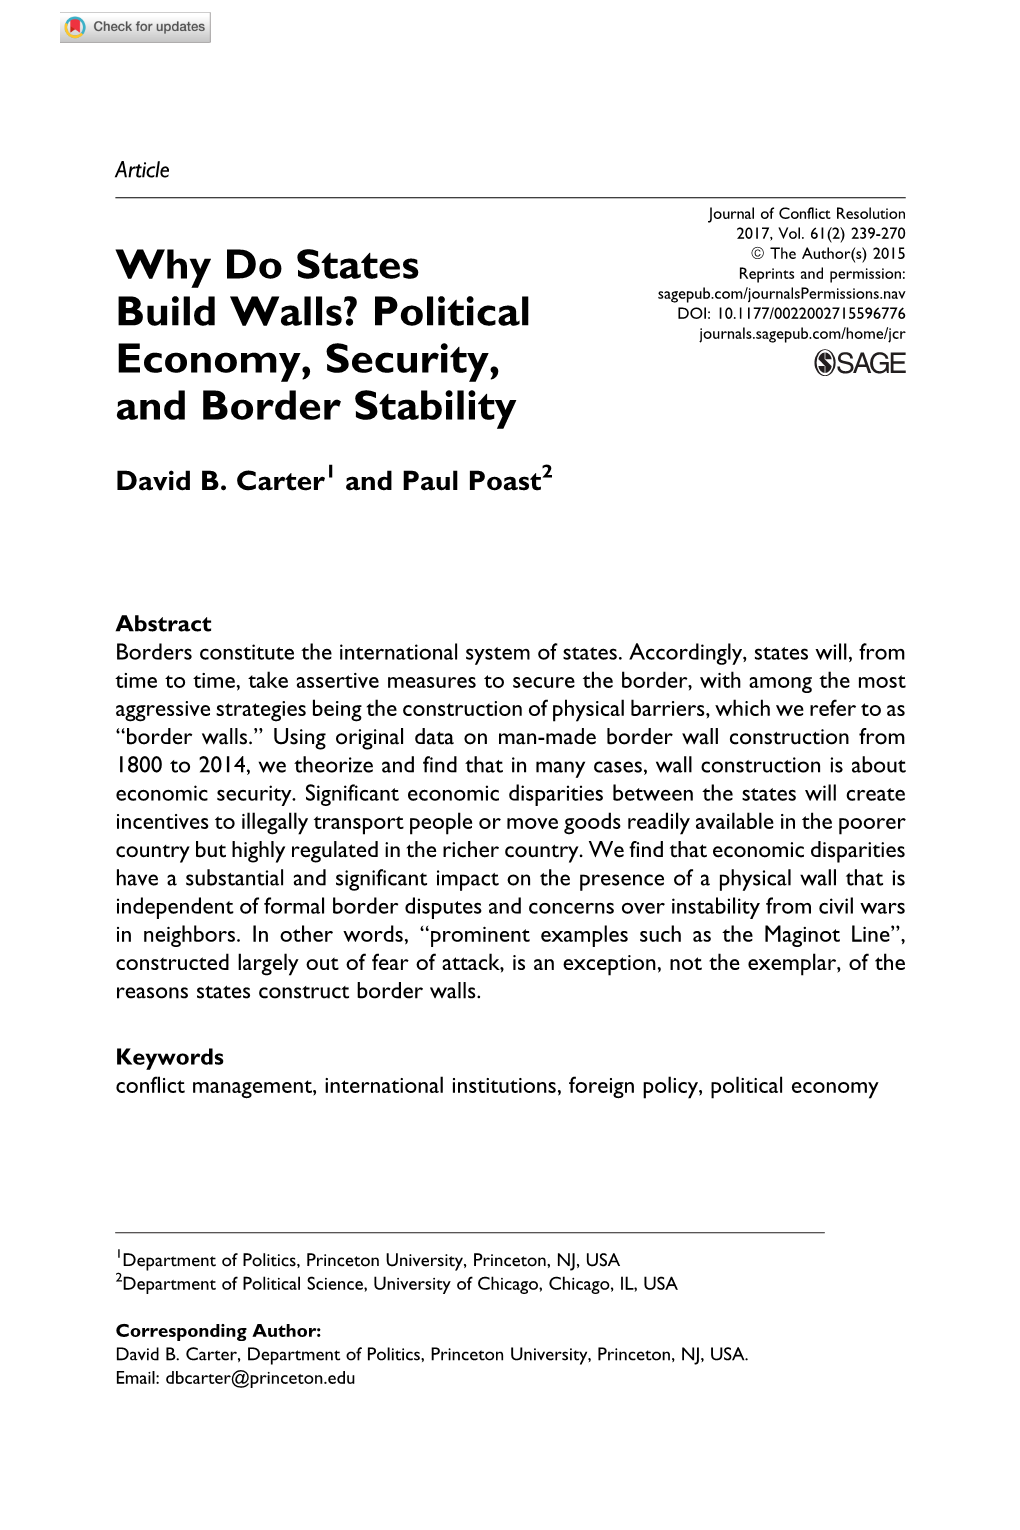 Why Do States Build Walls? Political Economy, Security, and Border